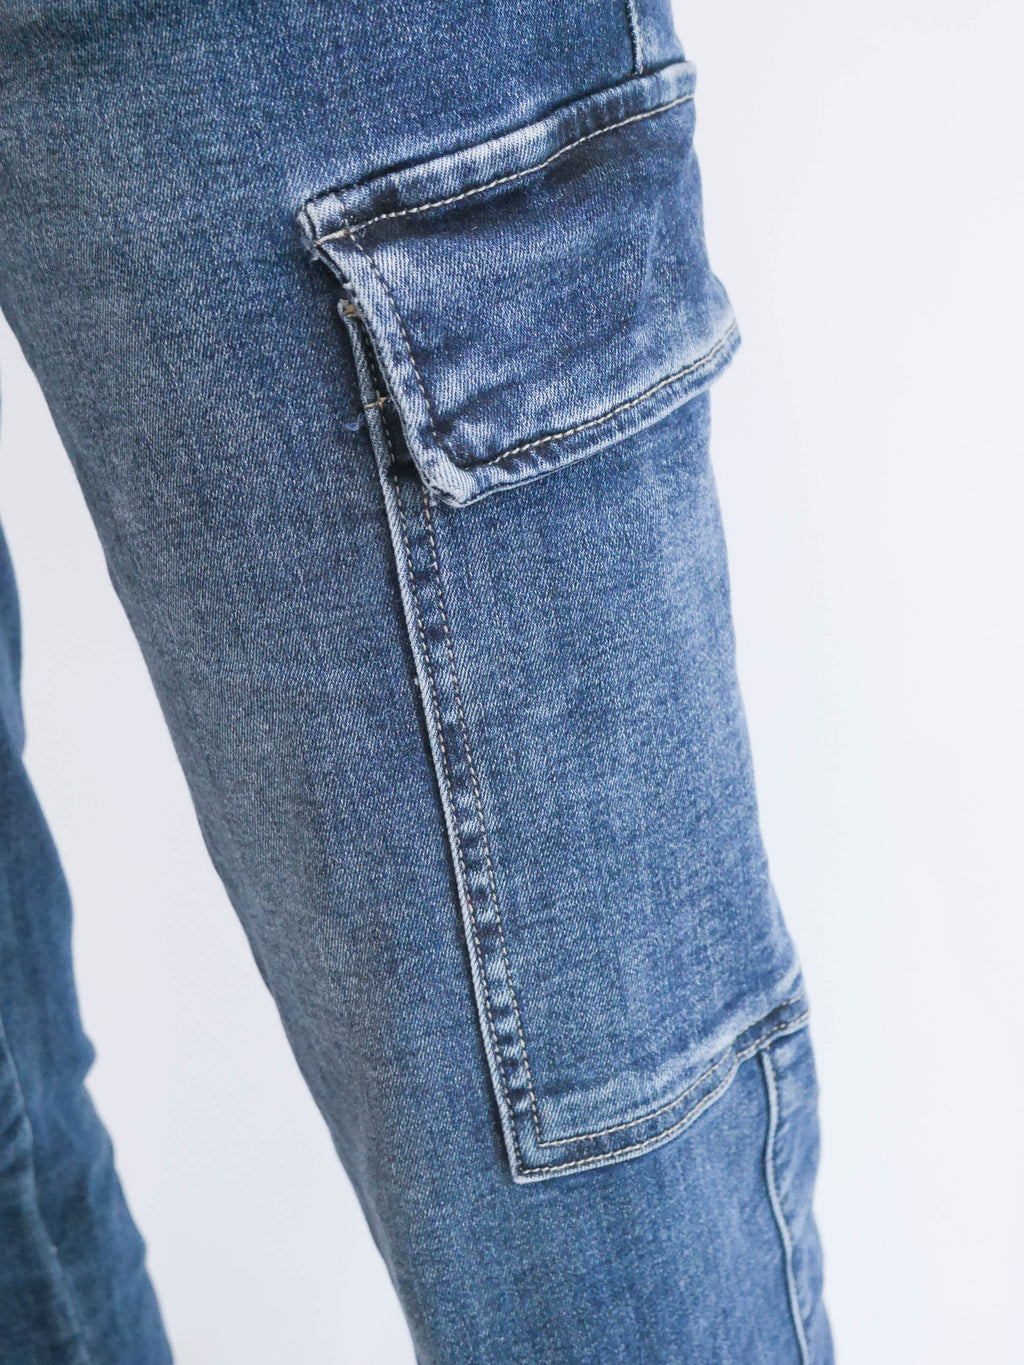 Melly & Co Denim Cargo Jeans